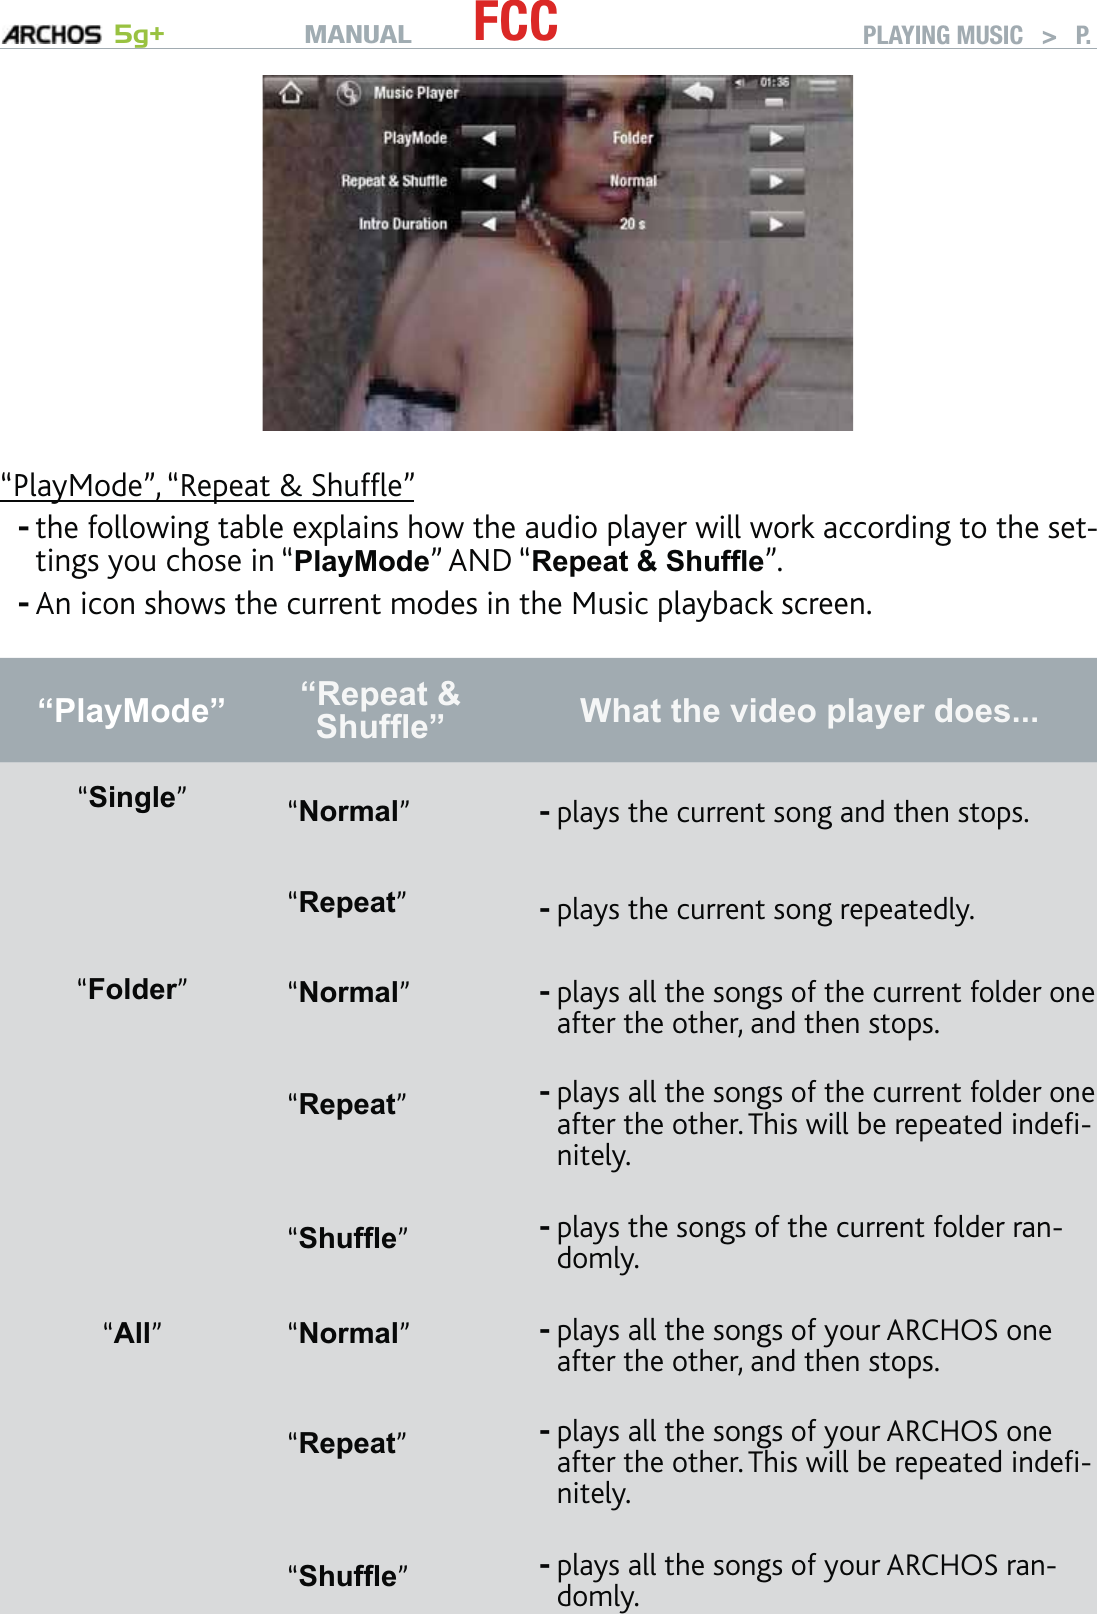 MANUAL 5g+ FCC PLAYING MUSIC   &gt;   P. 18“PlayMode”, “Repeat &amp; Shufﬂe”the following table explains how the audio player will work according to the set-tings you chose in “PlayMode” AND “Repeat &amp; Shufﬂe”. An icon shows the current modes in the Music playback screen.“PlayMode”  “Repeat &amp; Shufﬂe” What the video player does...“Single”“Normal”plays the current song and then stops.-“Repeat”plays the current song repeatedly.-“Folder”“Normal” plays all the songs of the current folder one after the other, and then stops.-“Repeat”plays all the songs of the current folder one after the other. This will be repeated indeﬁ-nitely.-“Shufﬂe”plays the songs of the current folder ran-domly.-“All”“Normal”plays all the songs of your ARCHOS one after the other, and then stops.-“Repeat”plays all the songs of your ARCHOS one after the other. This will be repeated indeﬁ-nitely.-“Shufﬂe”plays all the songs of your ARCHOS ran-domly.---